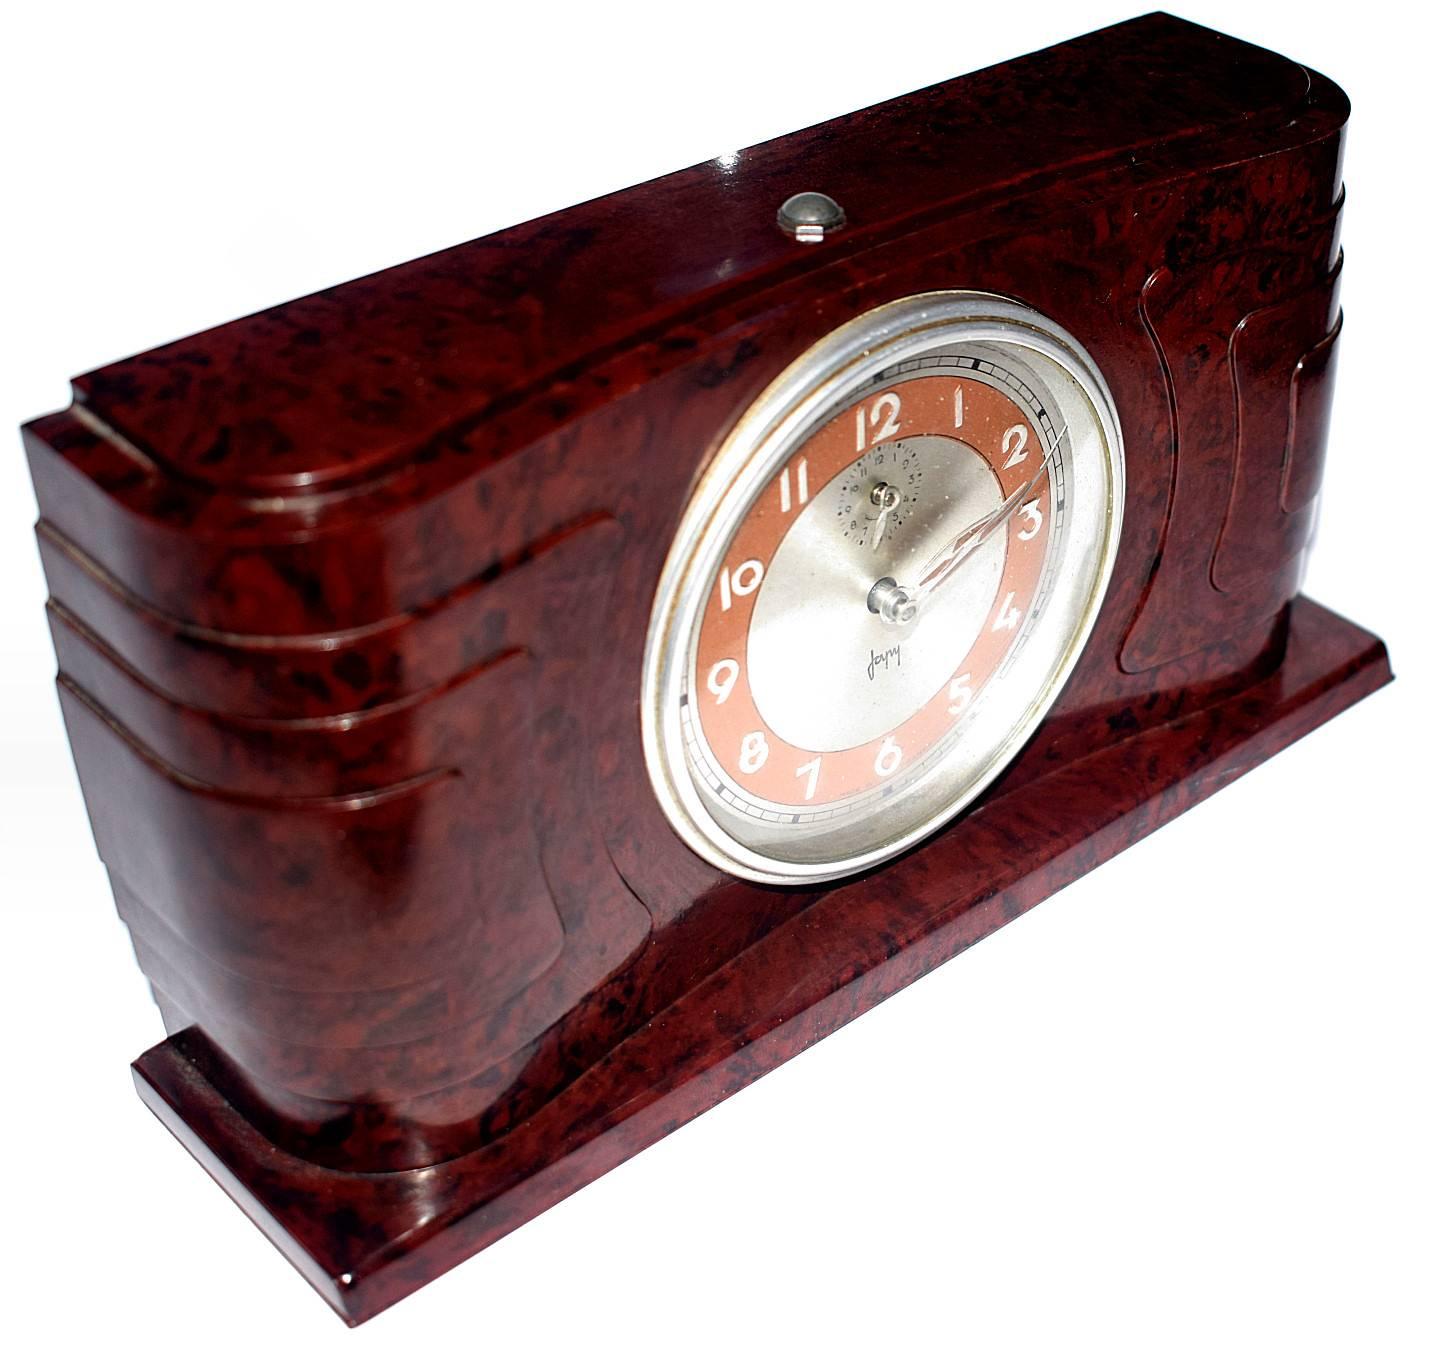 Very attractive and totally authentic 1930s French Bakelite clock by the clock makers 'Japy'. The streamline casing is in a deep mottled red bakelite and is excellent condition with no damage to report. The clock works well and has a nice mellow